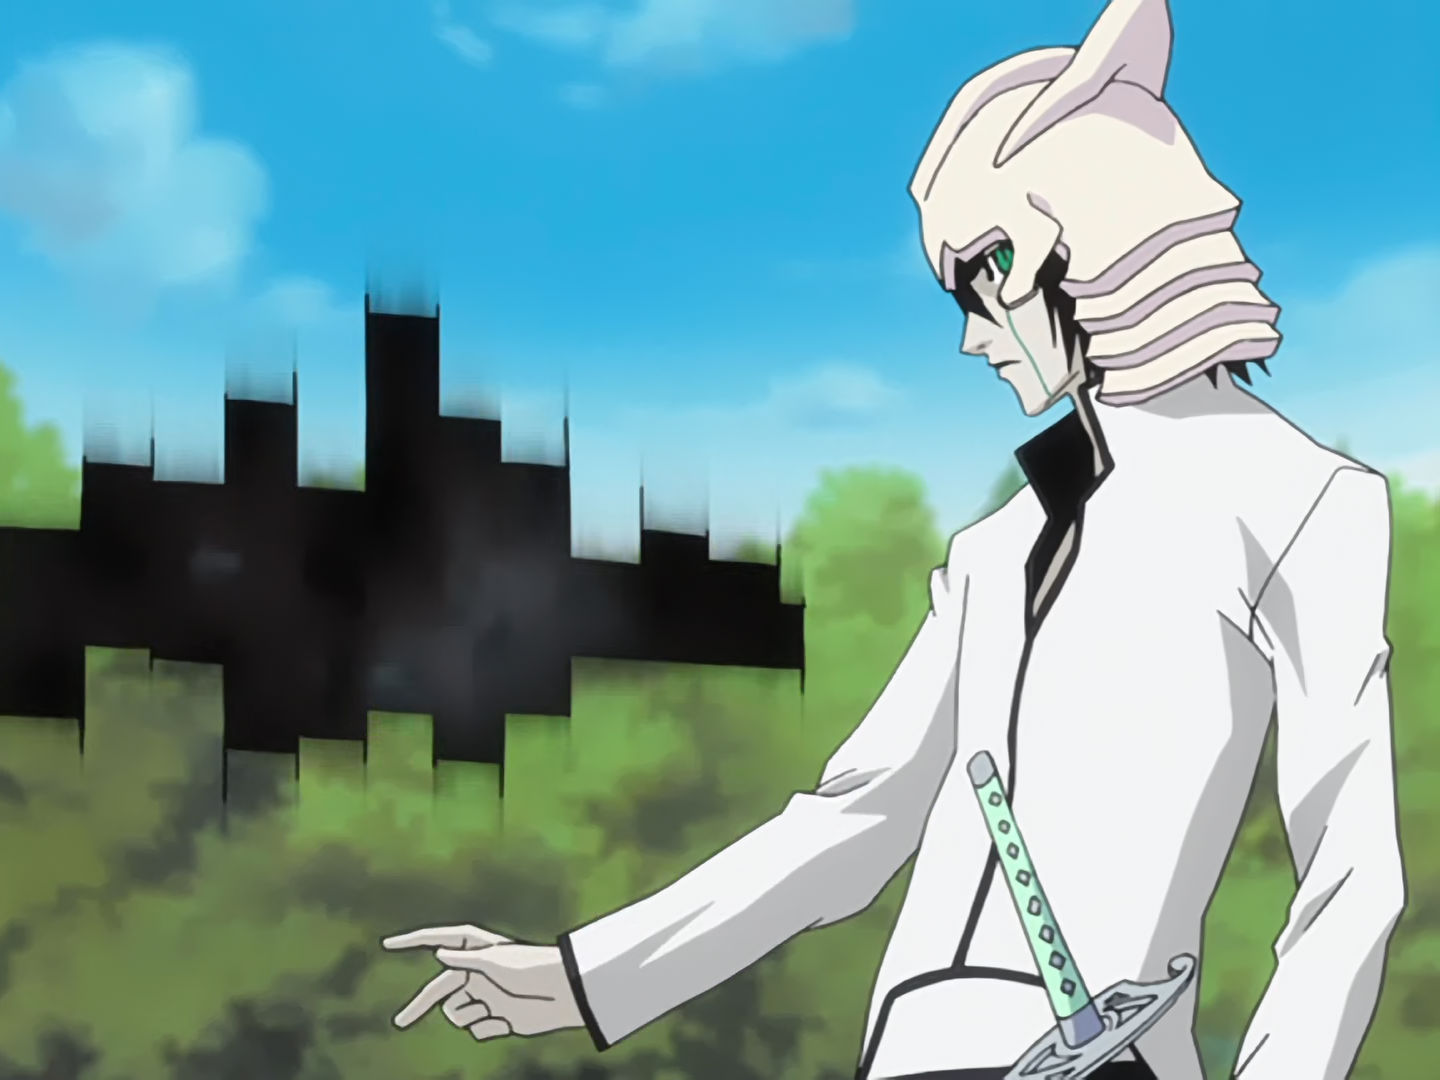 bleach - Why is Ulquiorra the only Espada with a second release? - Anime &  Manga Stack Exchange